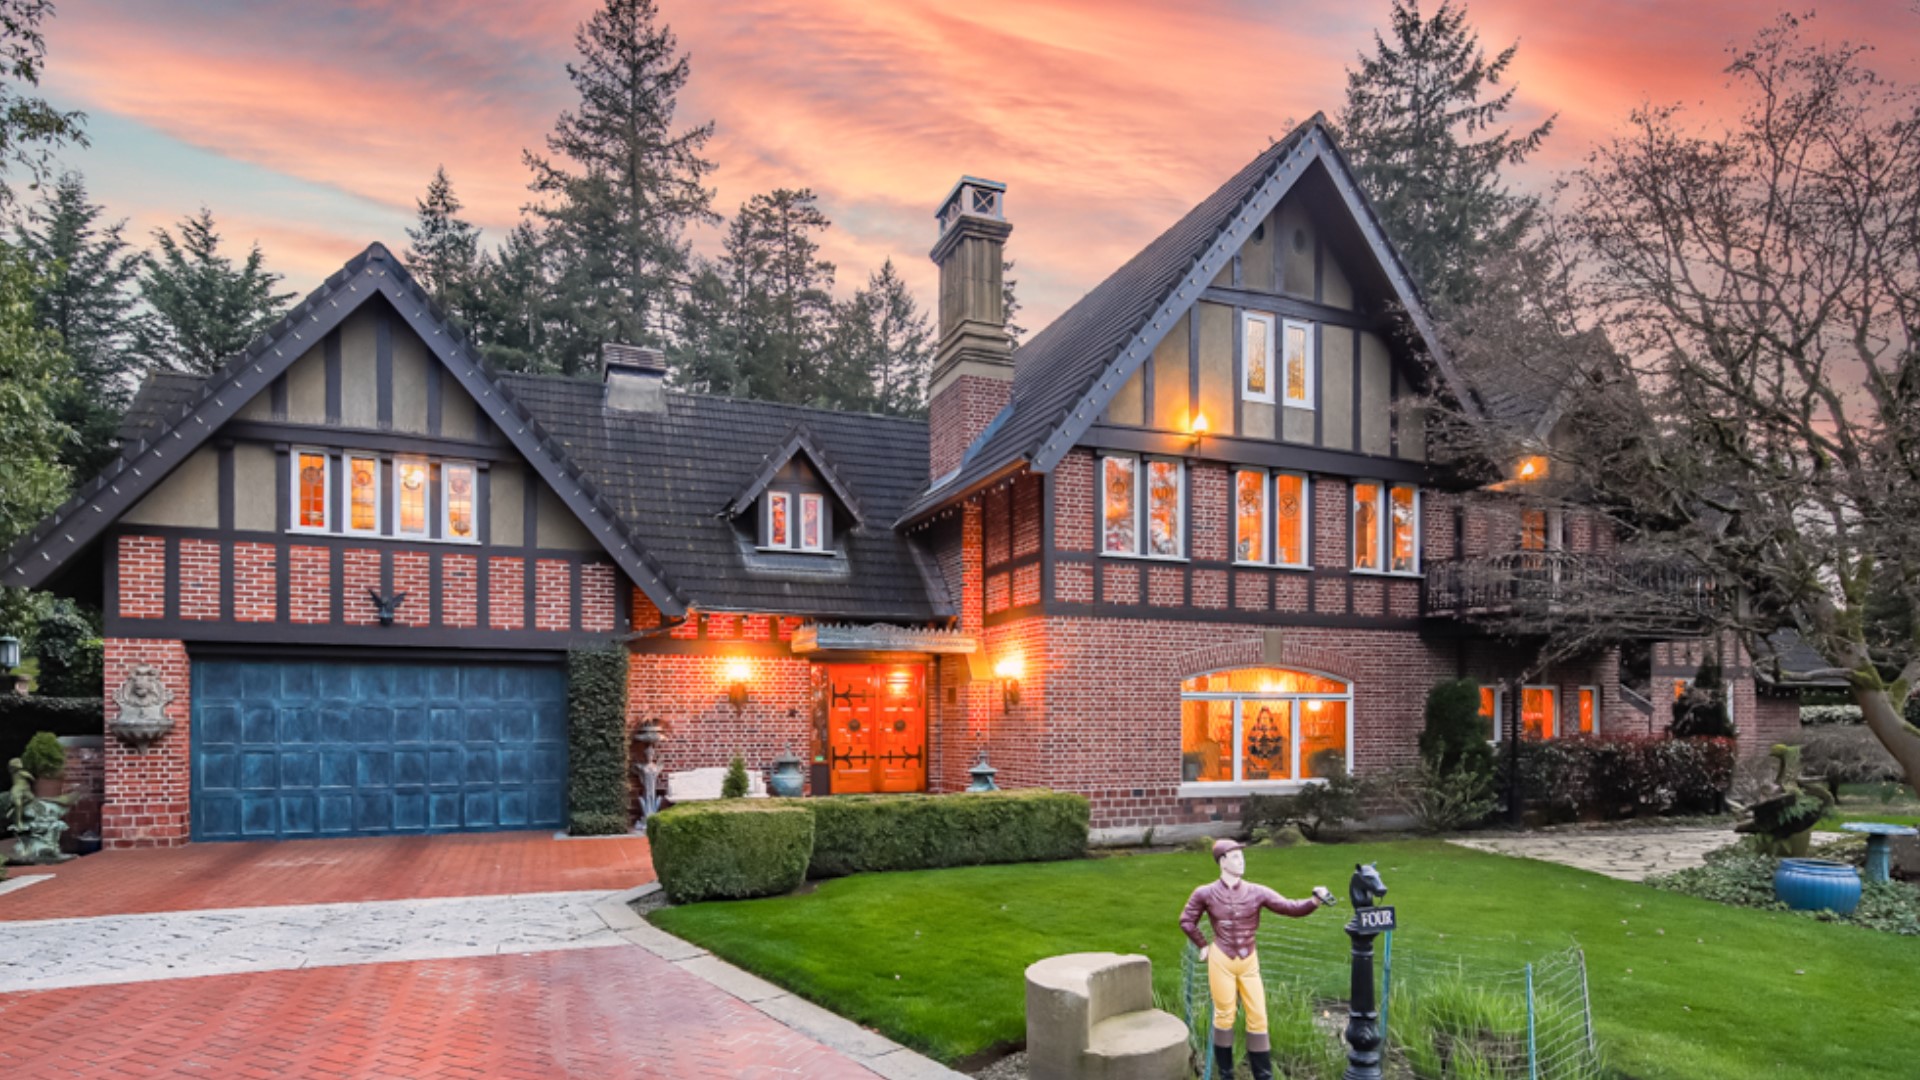 This $3.25 million property is as unique as its unconventional owner. #k5evening